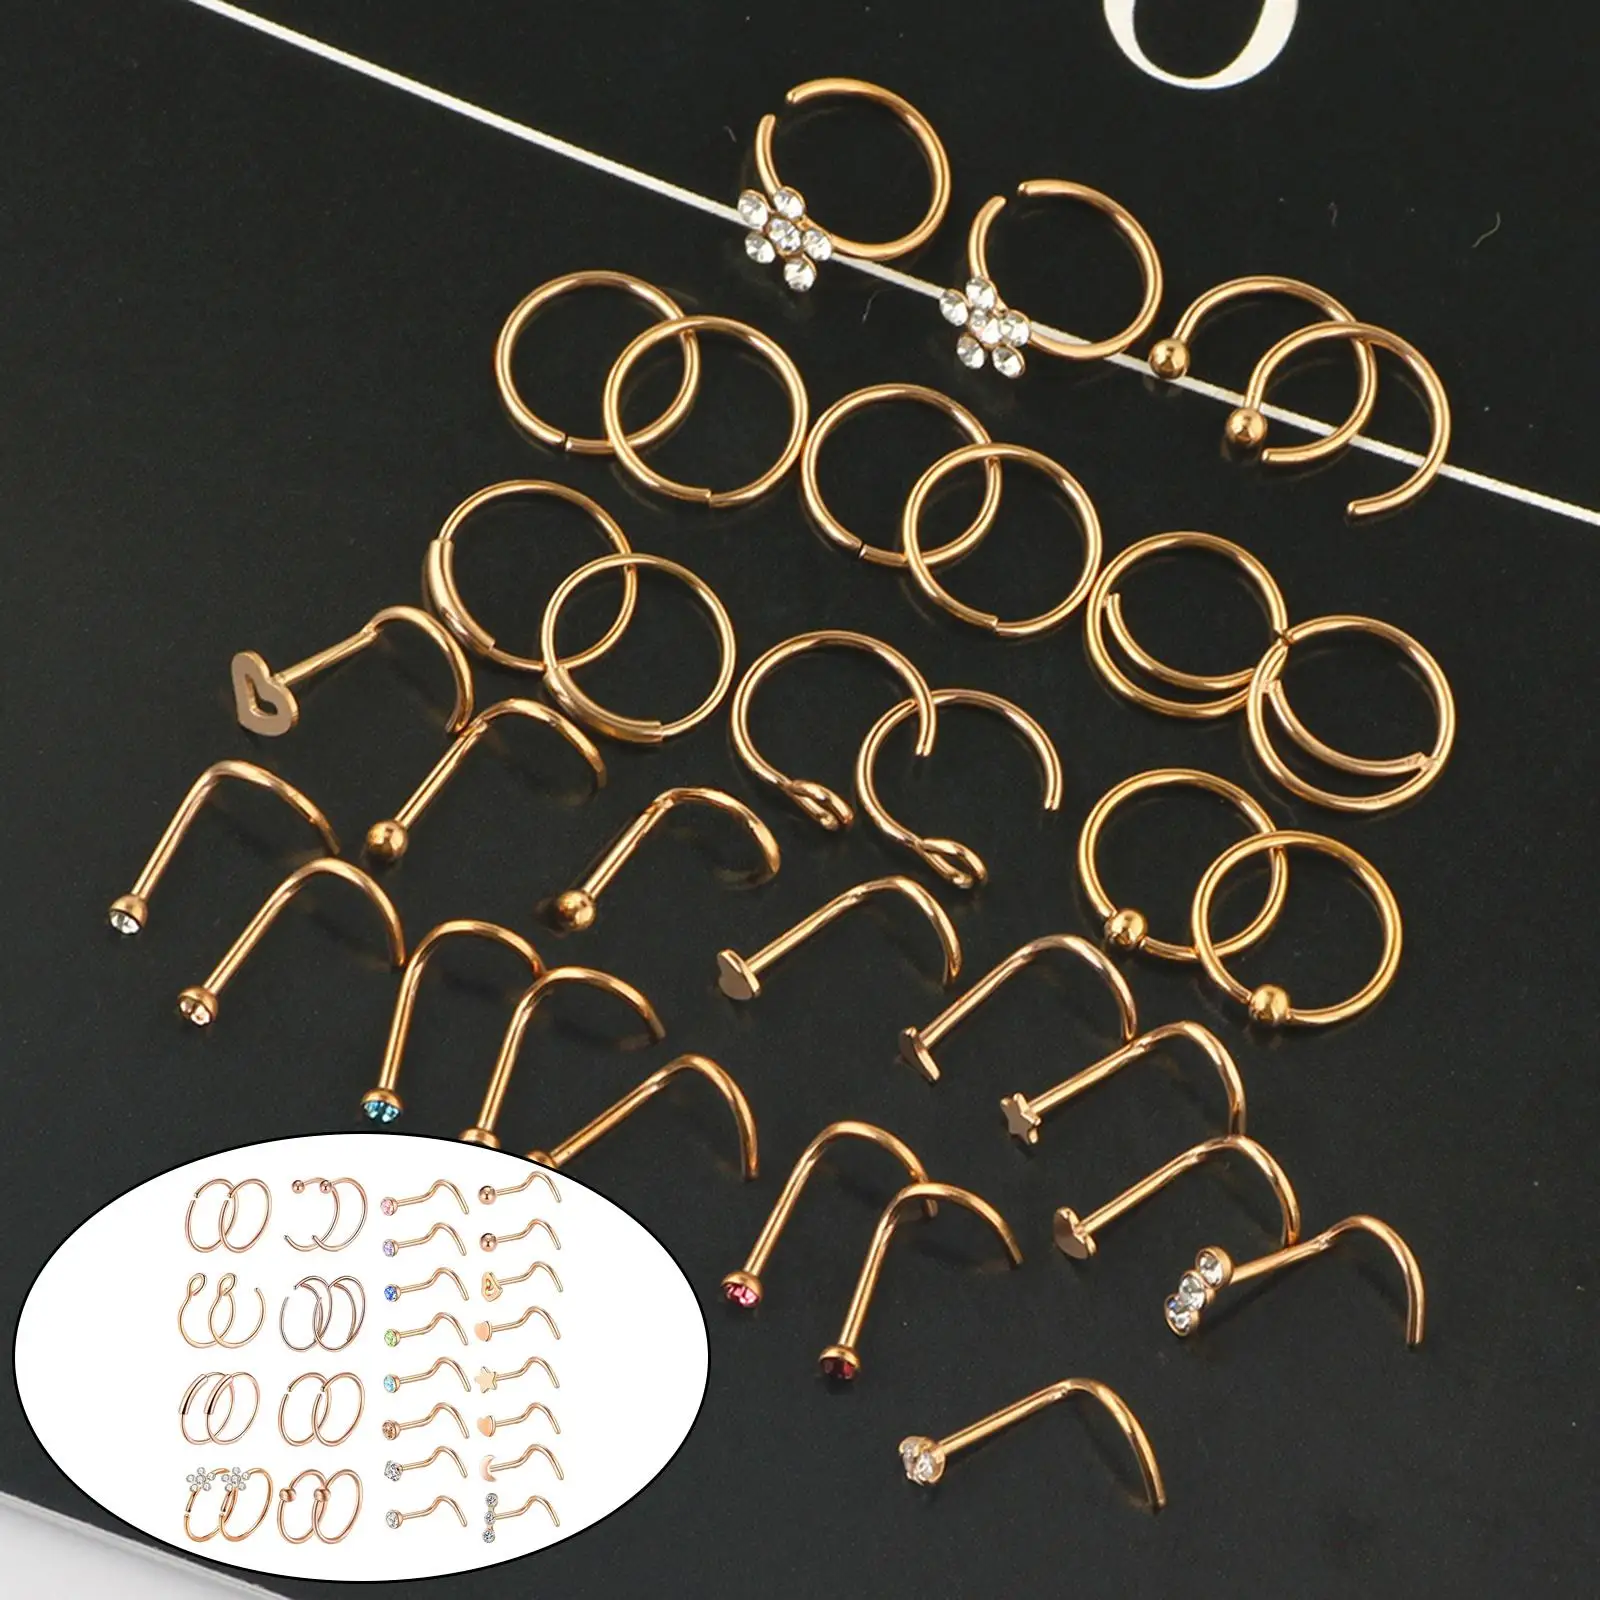 32 Pieces Stainless  Shaped Nose Stud Earring Set with Nose  for Hoop  for Men Women